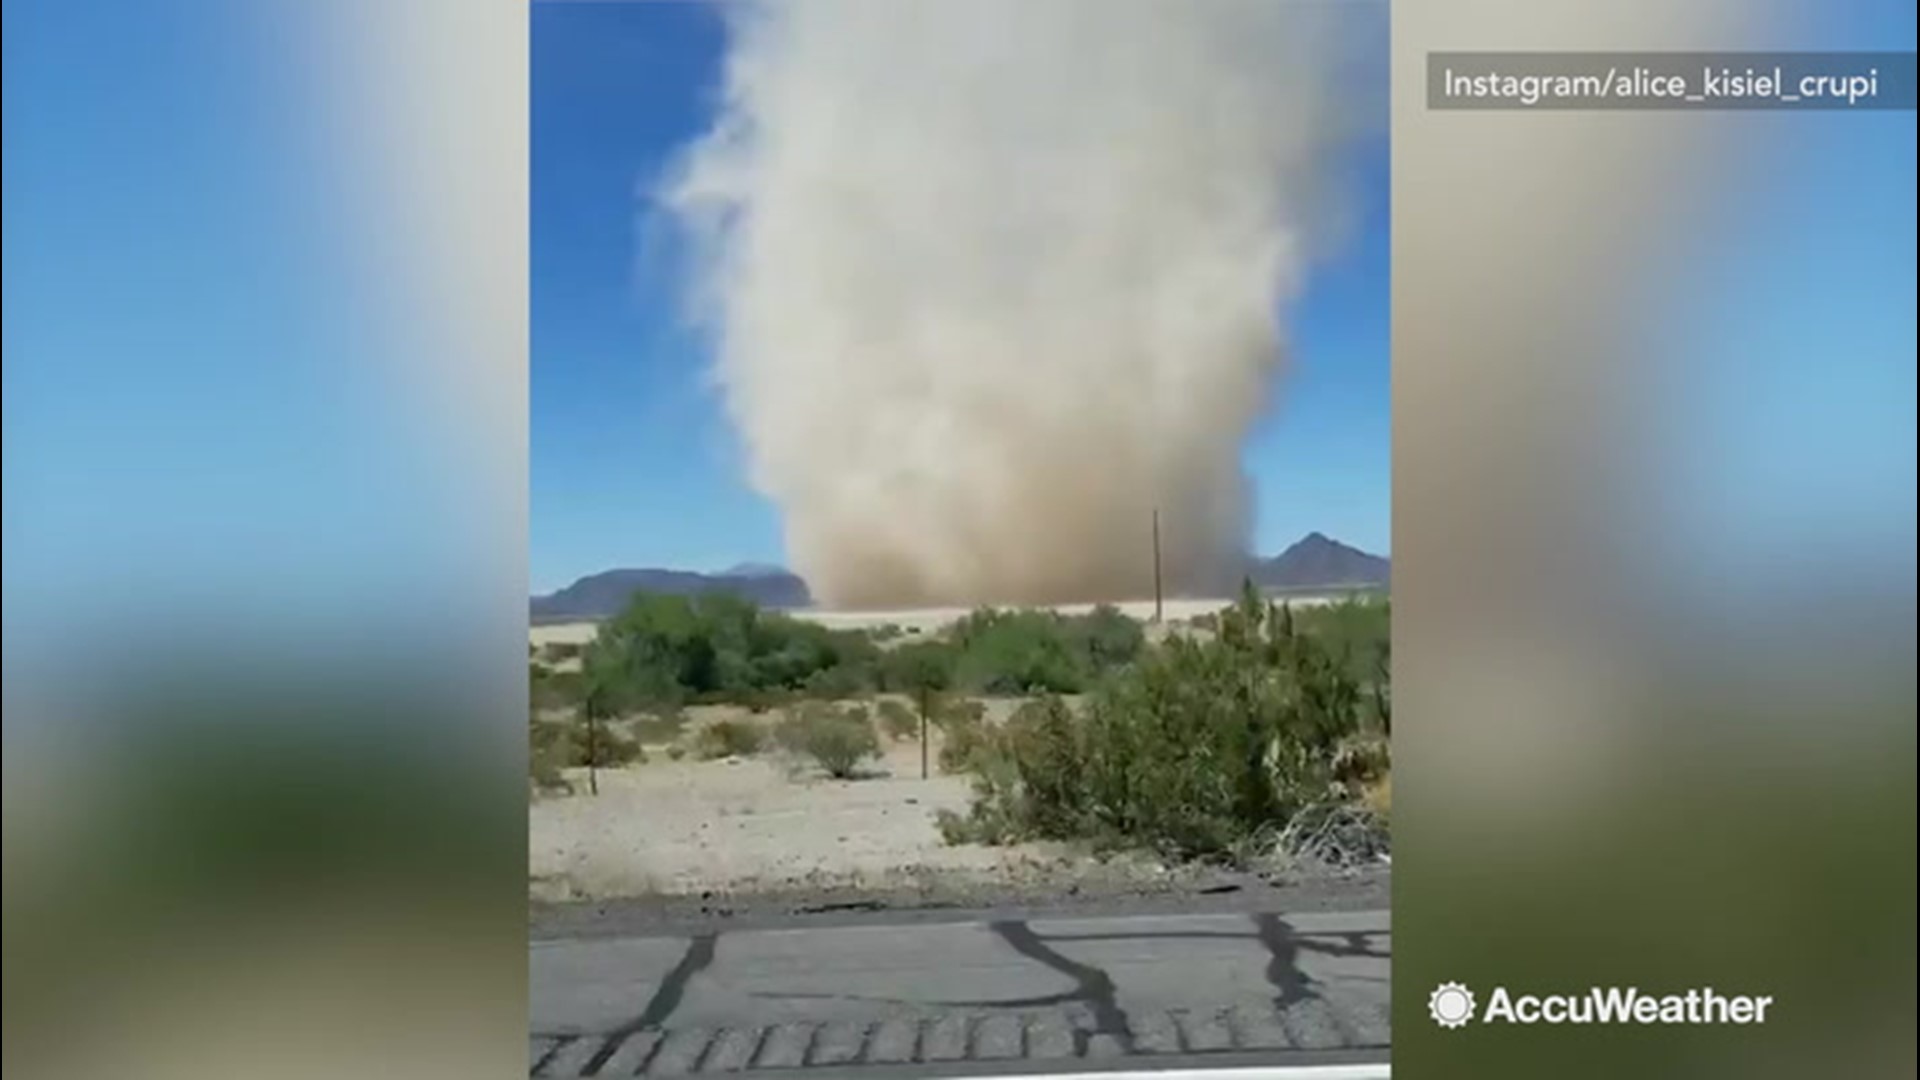 While on her way to California, this Instagram user was in for a little -or should we say massive - surprise as a dust devil starting to spin up in the Arizona desert. It looked like a tornado at one point, but eventually died out and drivers went on their way.